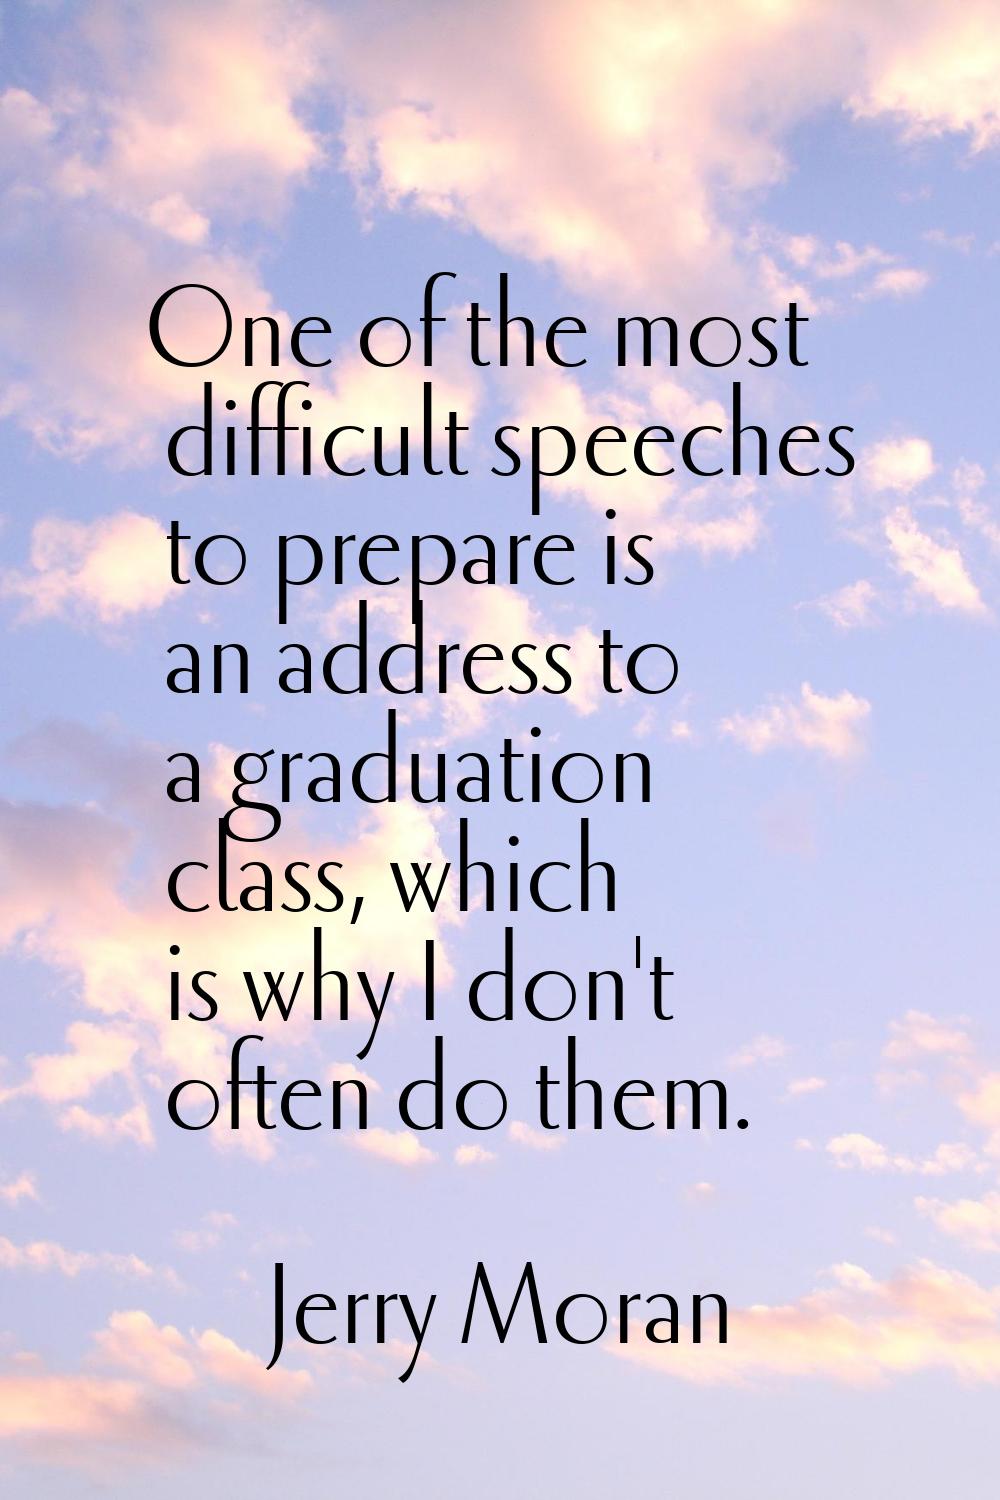 One of the most difficult speeches to prepare is an address to a graduation class, which is why I d